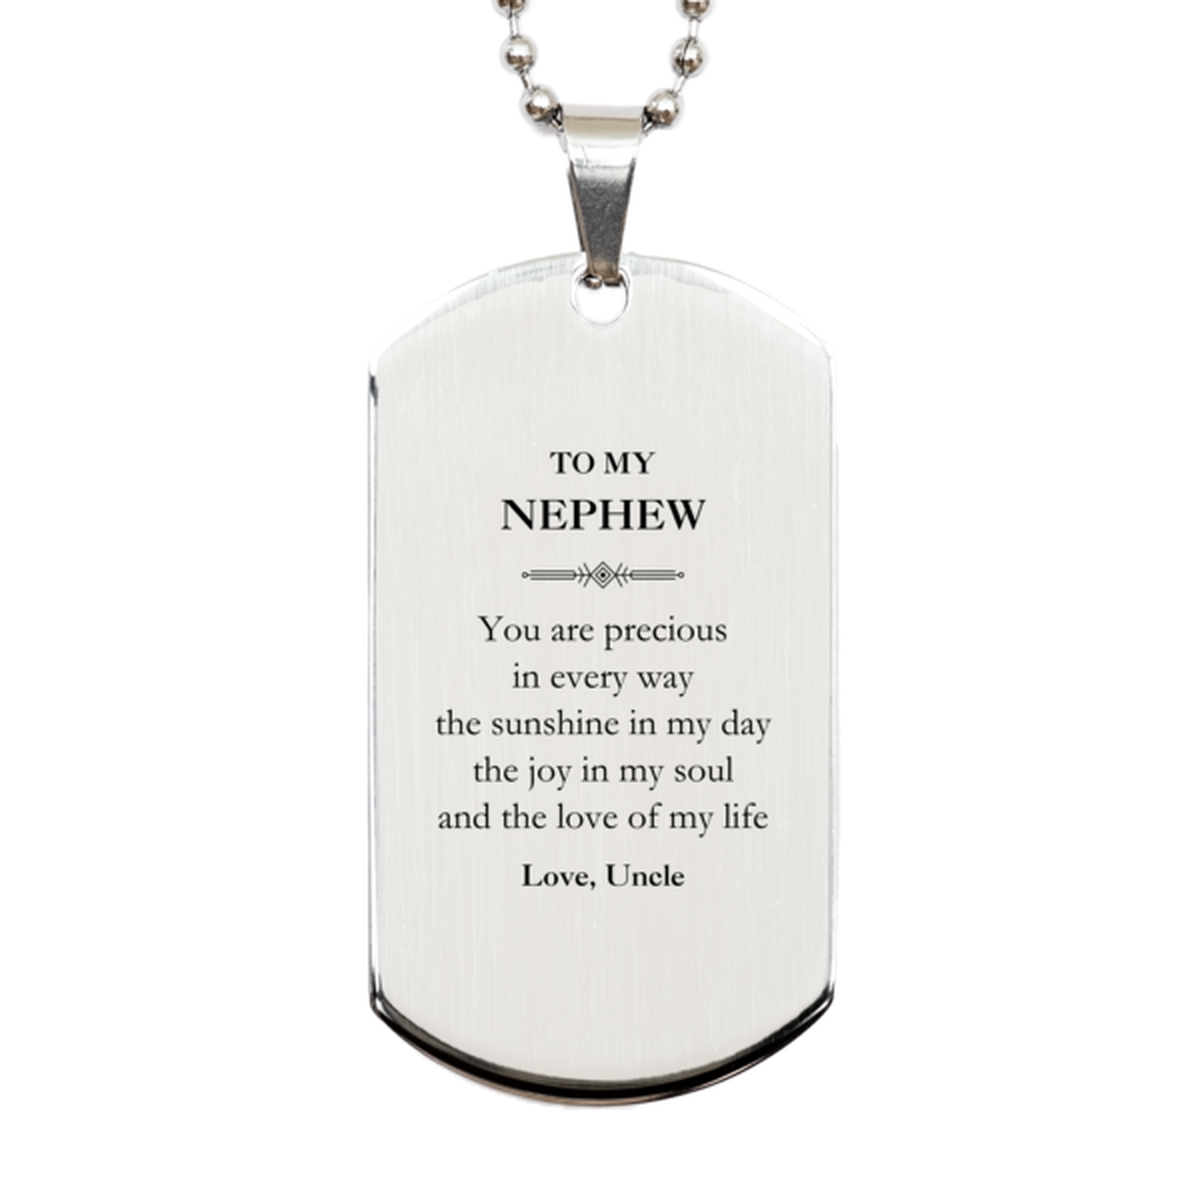 Graduation Gifts for Nephew Silver Dog Tag Present from Uncle, Christmas Nephew Birthday Gifts Nephew You are precious in every way the sunshine in my day. Love, Uncle